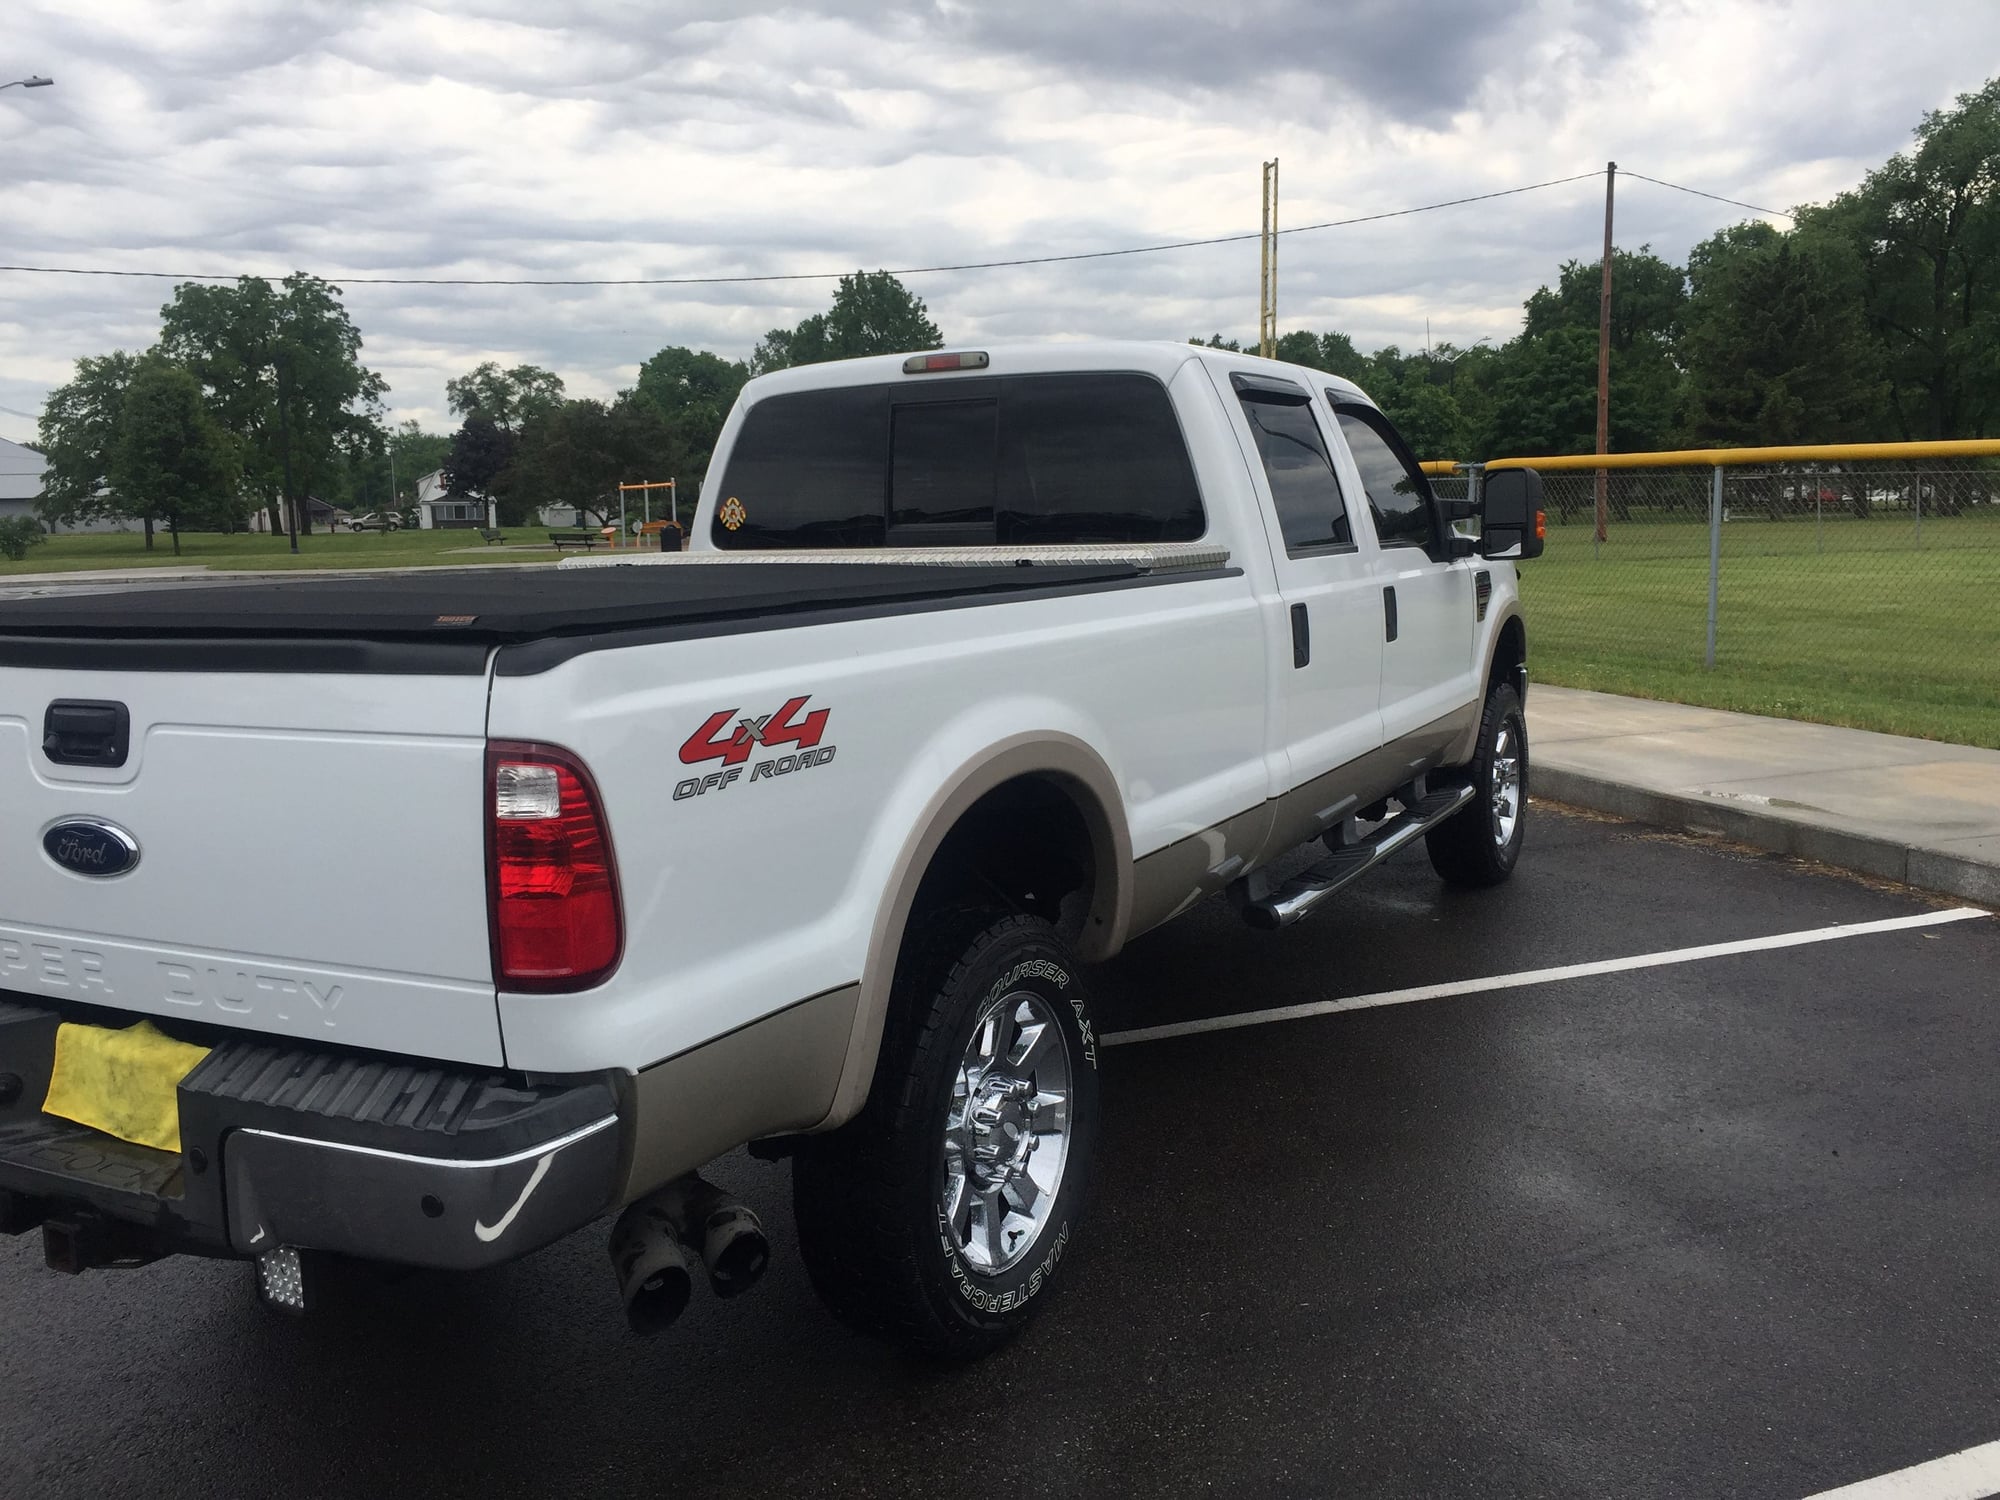 2009 Ford F-250 Super Duty - 2009 Ford F-250 Crew Cab Lariat 4x4  8' bed with a deleted 6.4 Powerstroke - Used - VIN 1FTSW21R09EA88516 - 8 cyl - 4WD - Automatic - Truck - White - Northern, IN 46544, United States